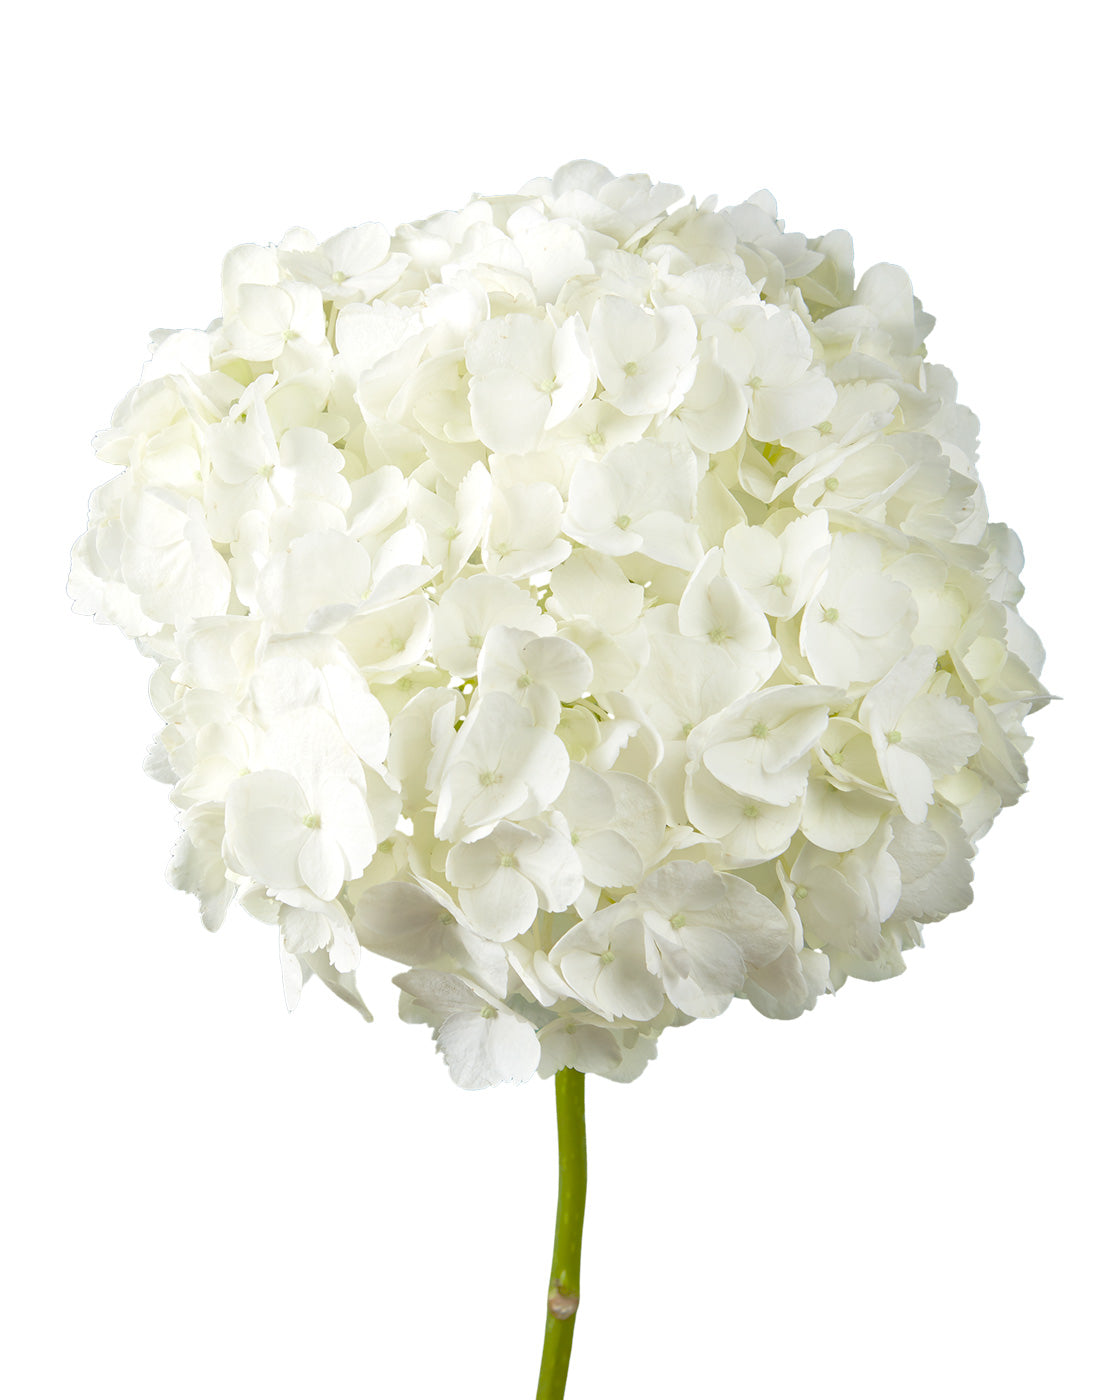 Super Select White Hydrangea Mother's Day